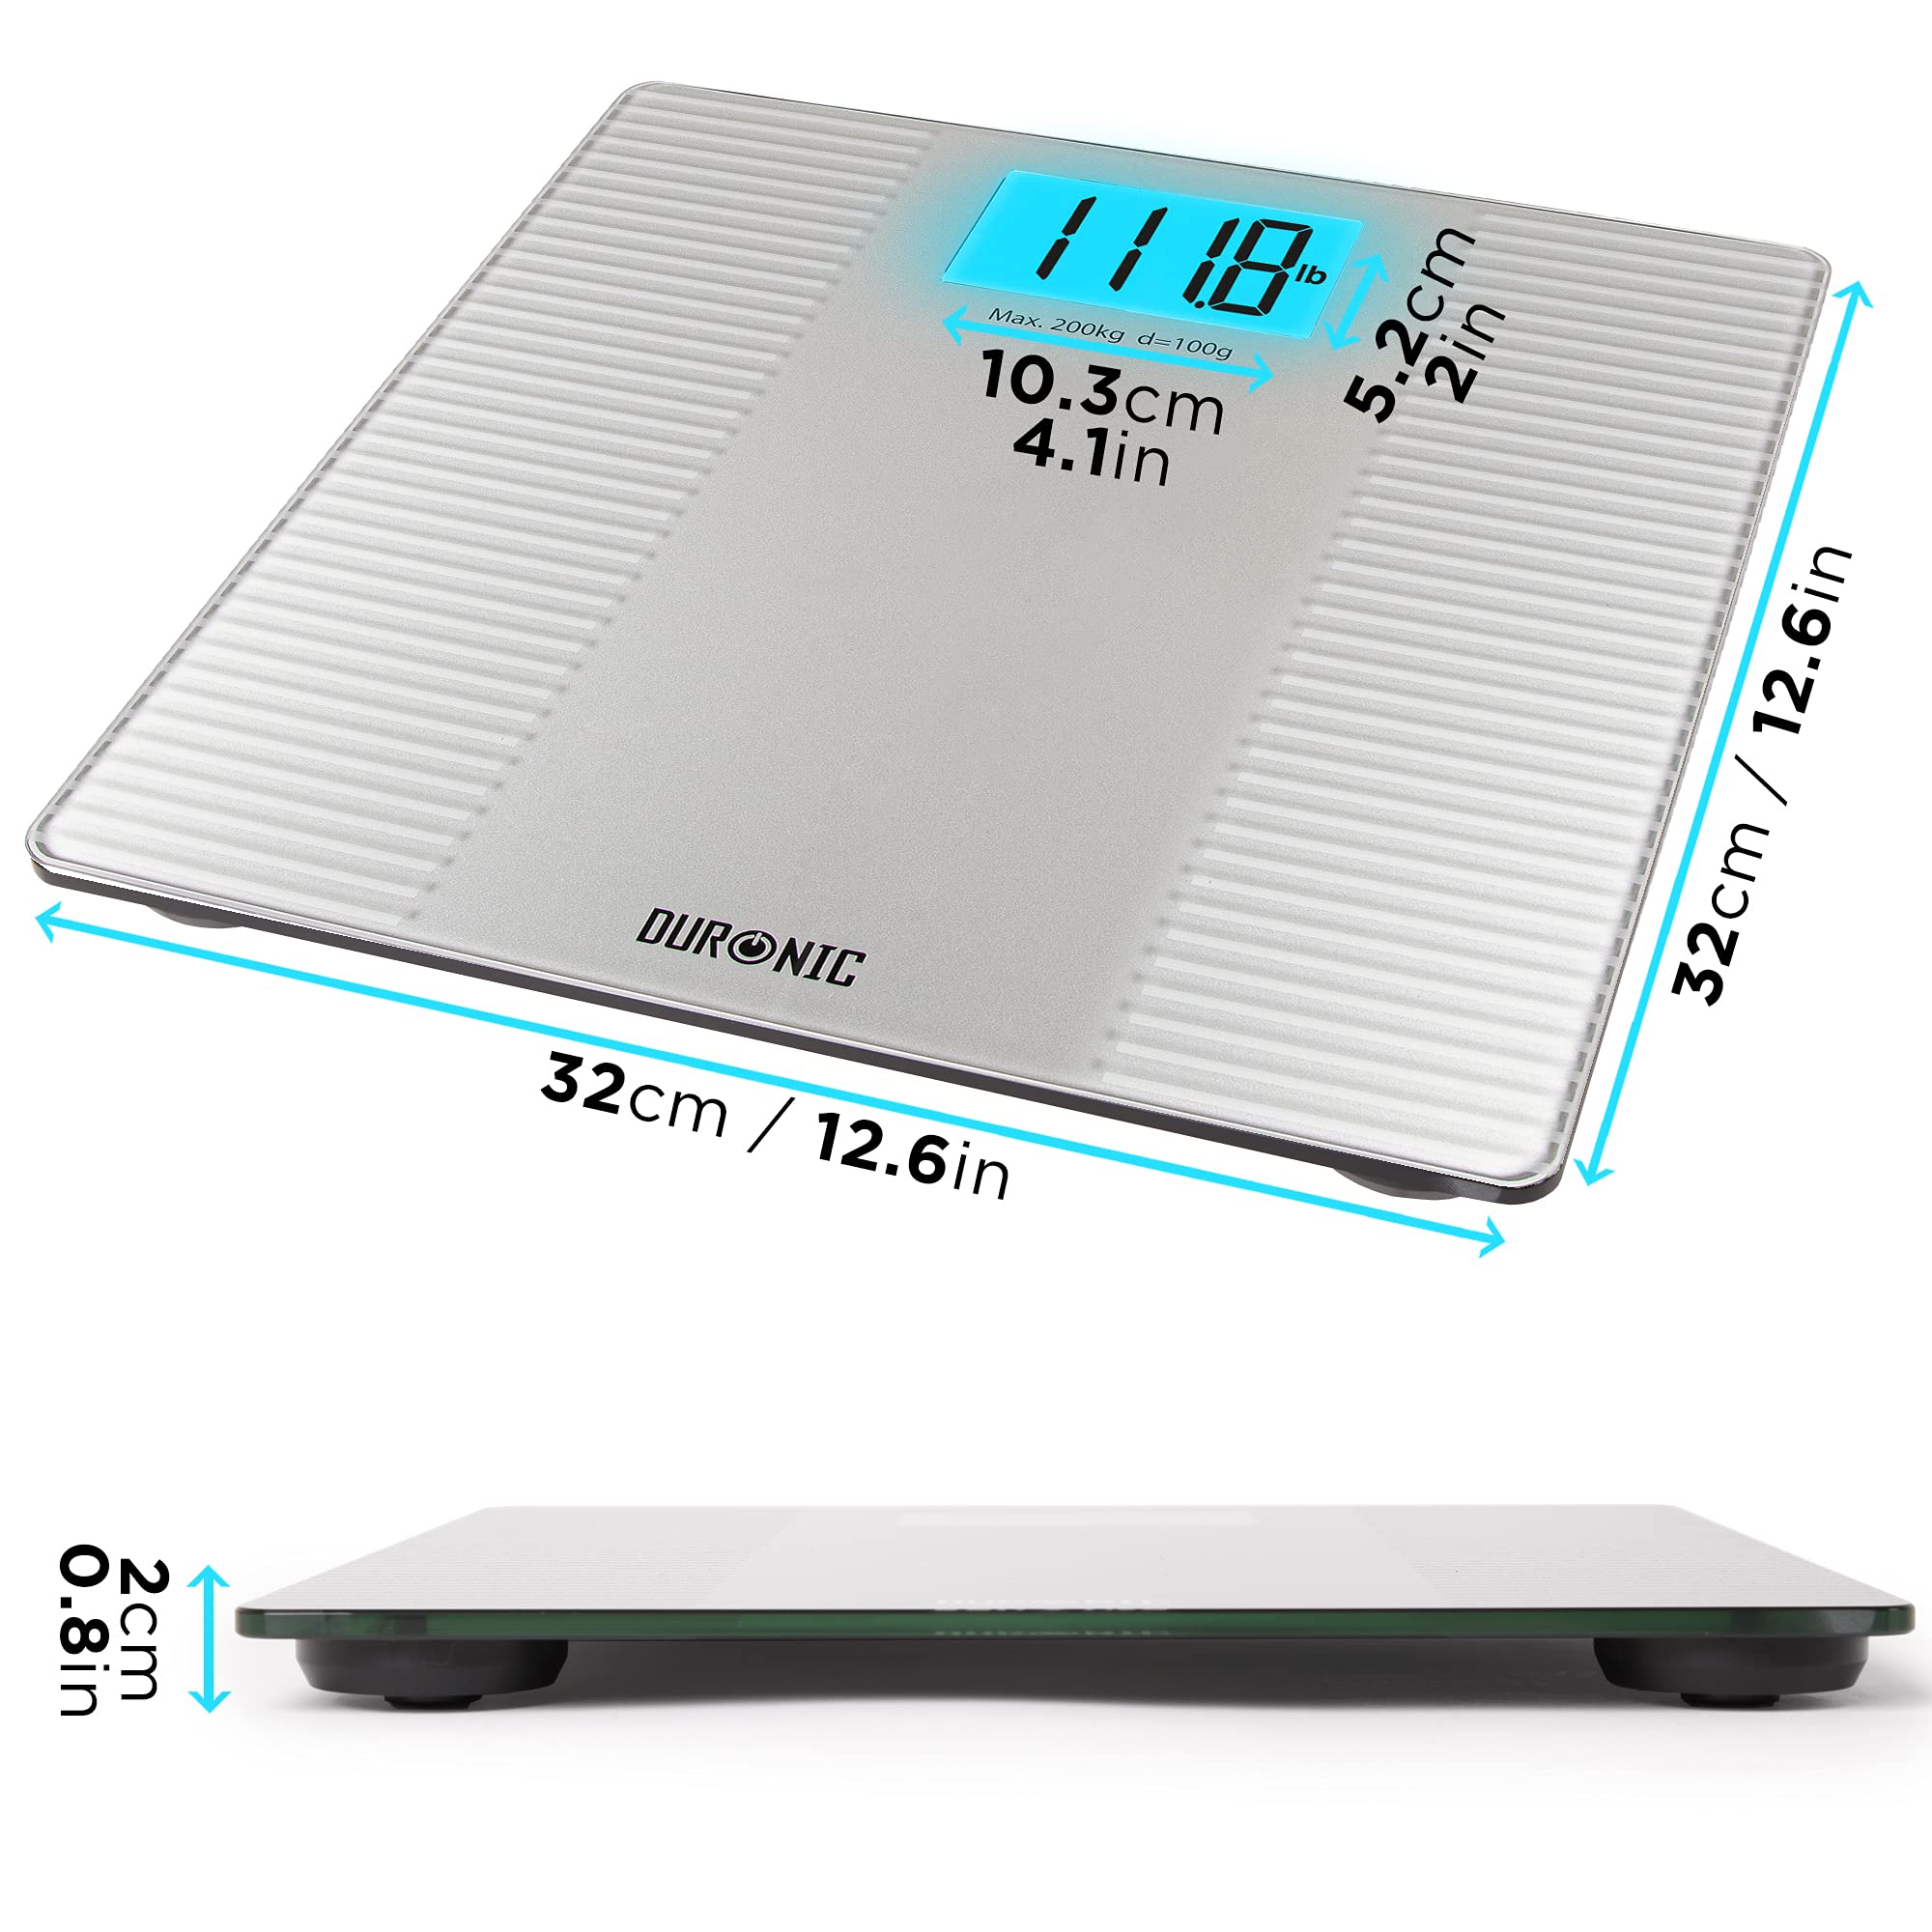 Duronic Body Scales BS204 | Measures Body Weight in Kilograms, Pounds & Stones | Silver Non-Slip Design | Step-On Activation Bathroom Scales | Precision Sensors | XL Digital Display | 200kg Capacity